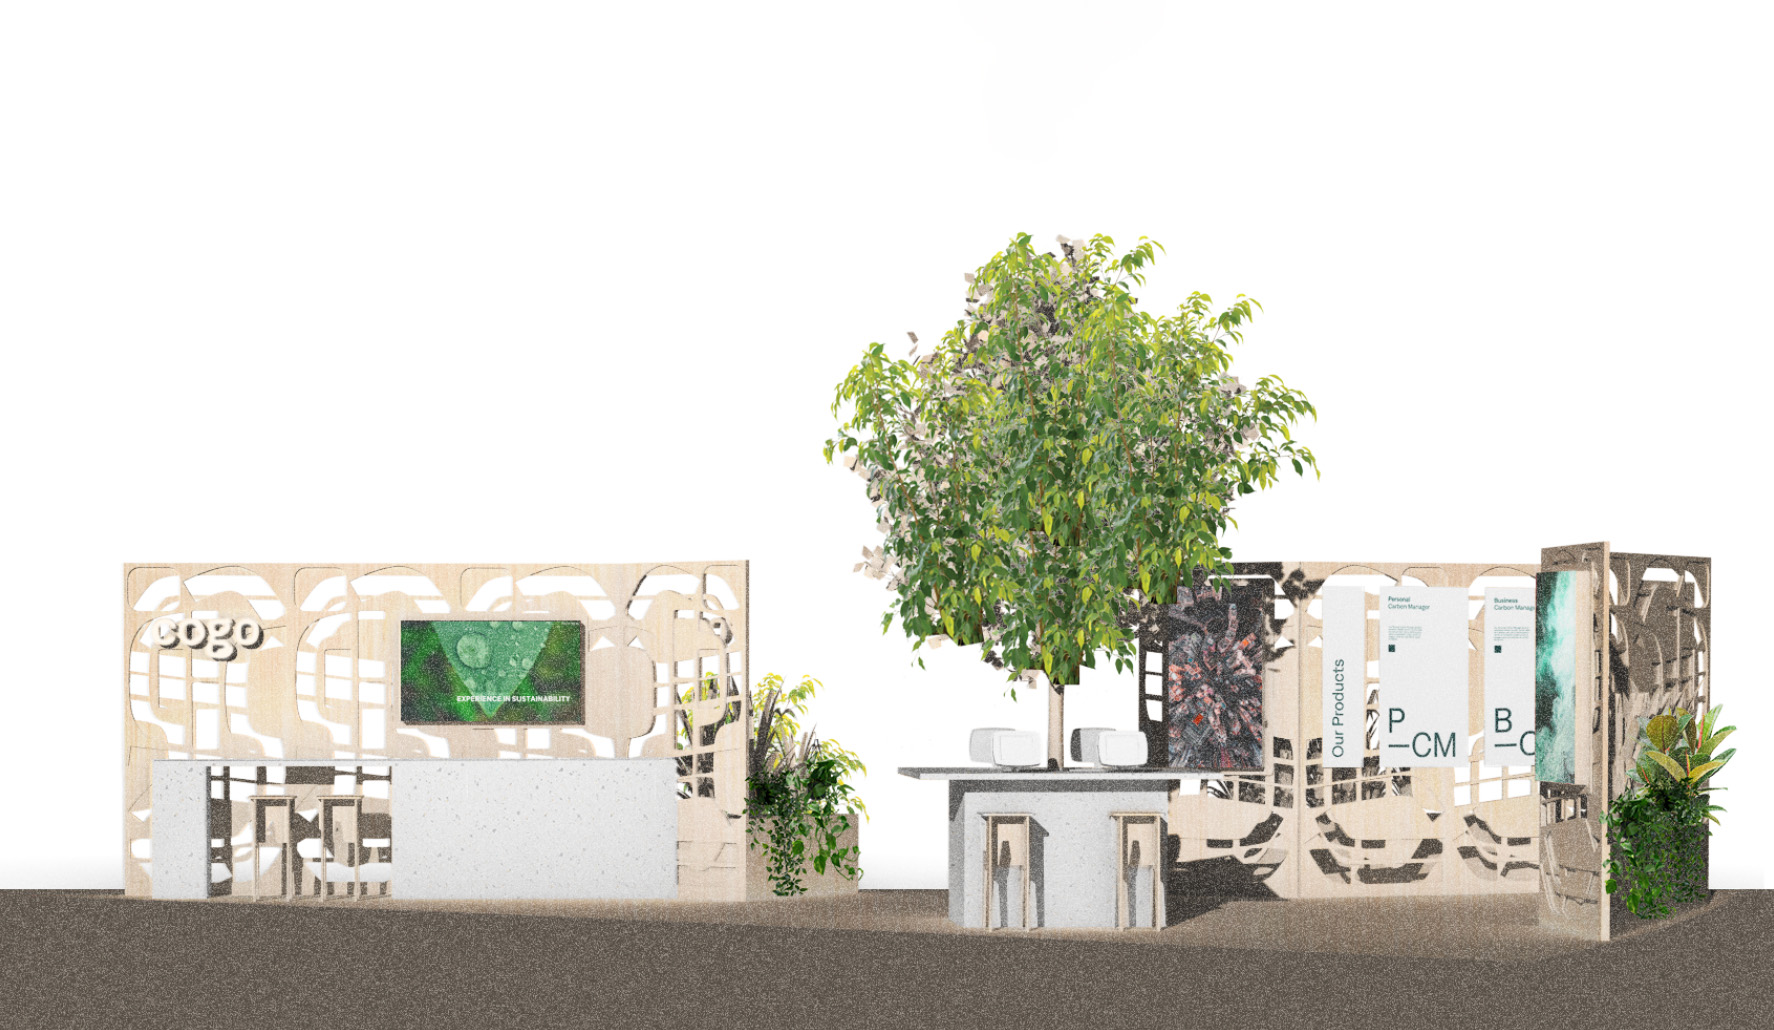 Cogo Raises the Bar in Sustainable Stand Design at Money2020